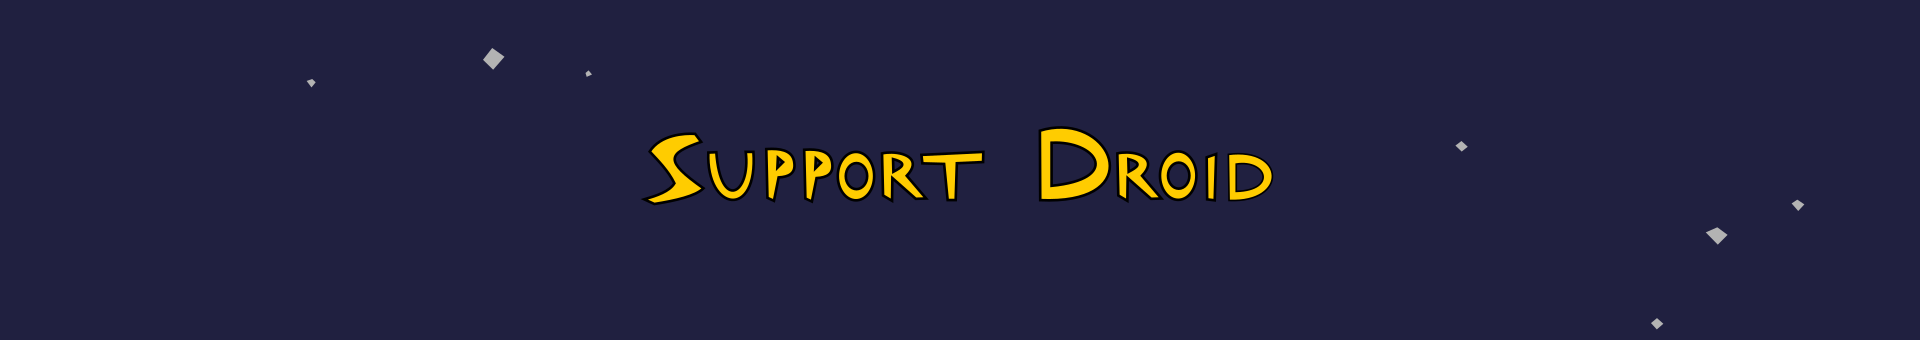 Support Droid